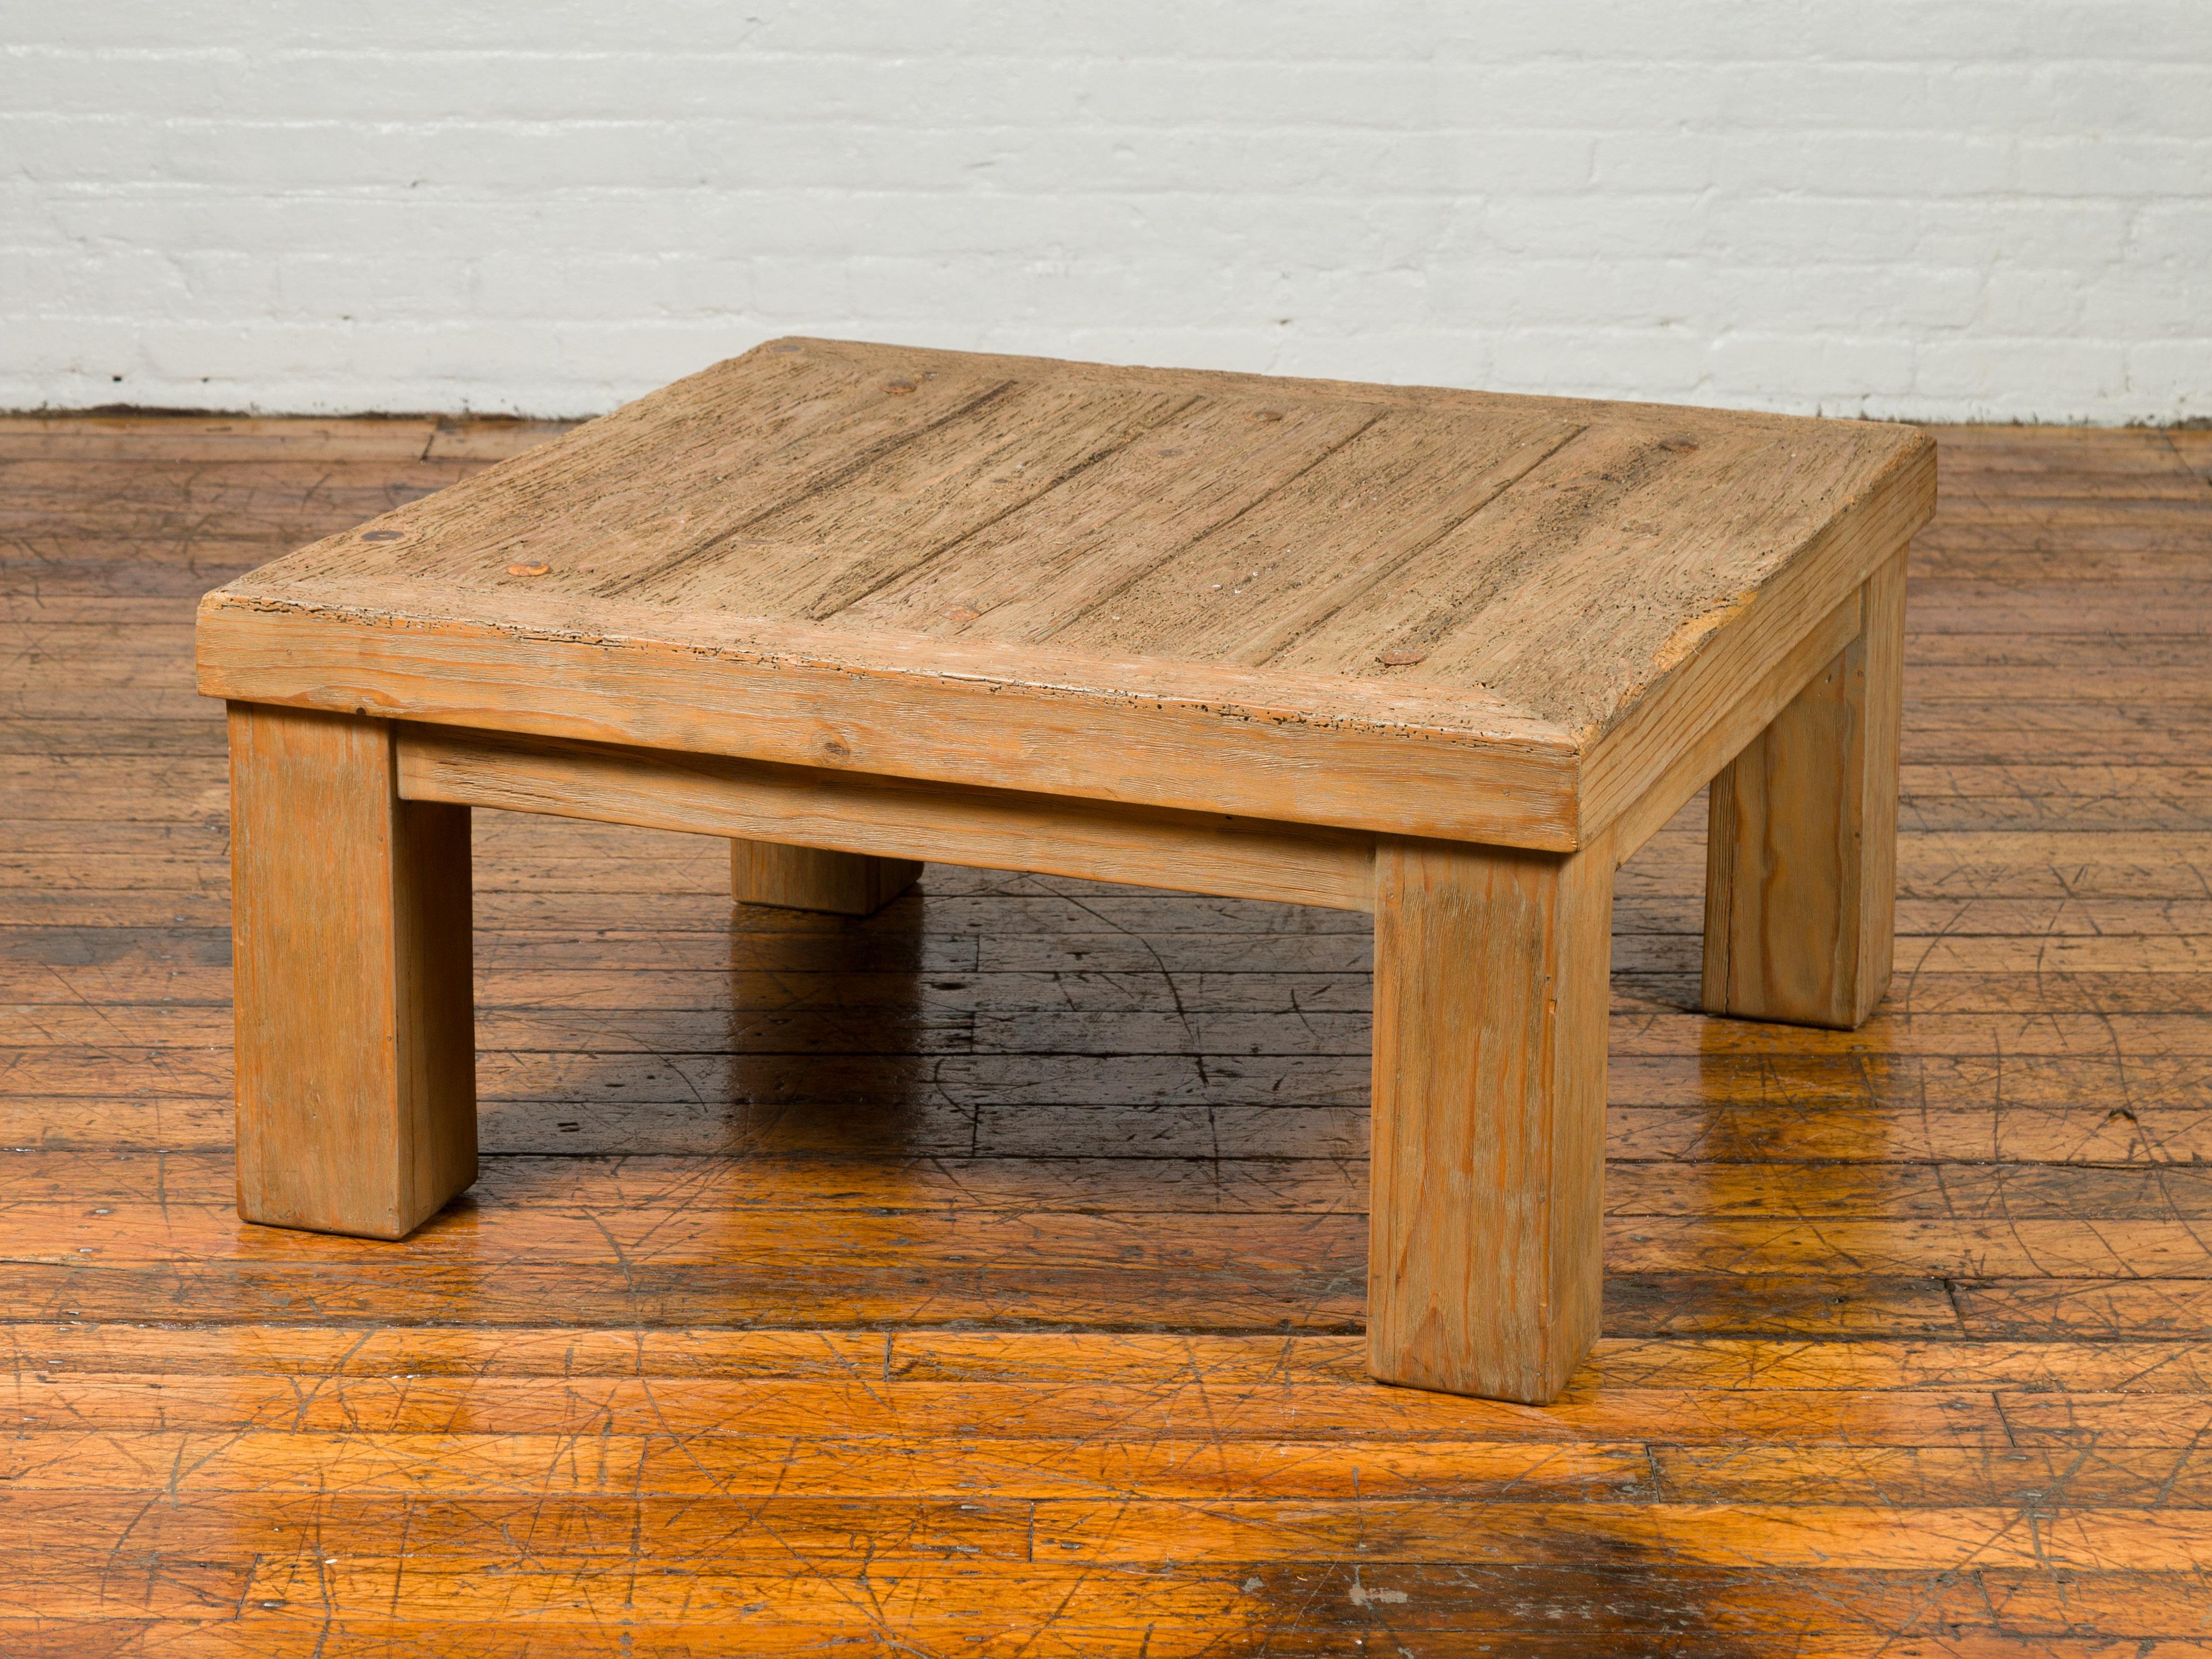 Vintage Driftwood Midcentury Coffee Table from Mexico with Square Legs 5